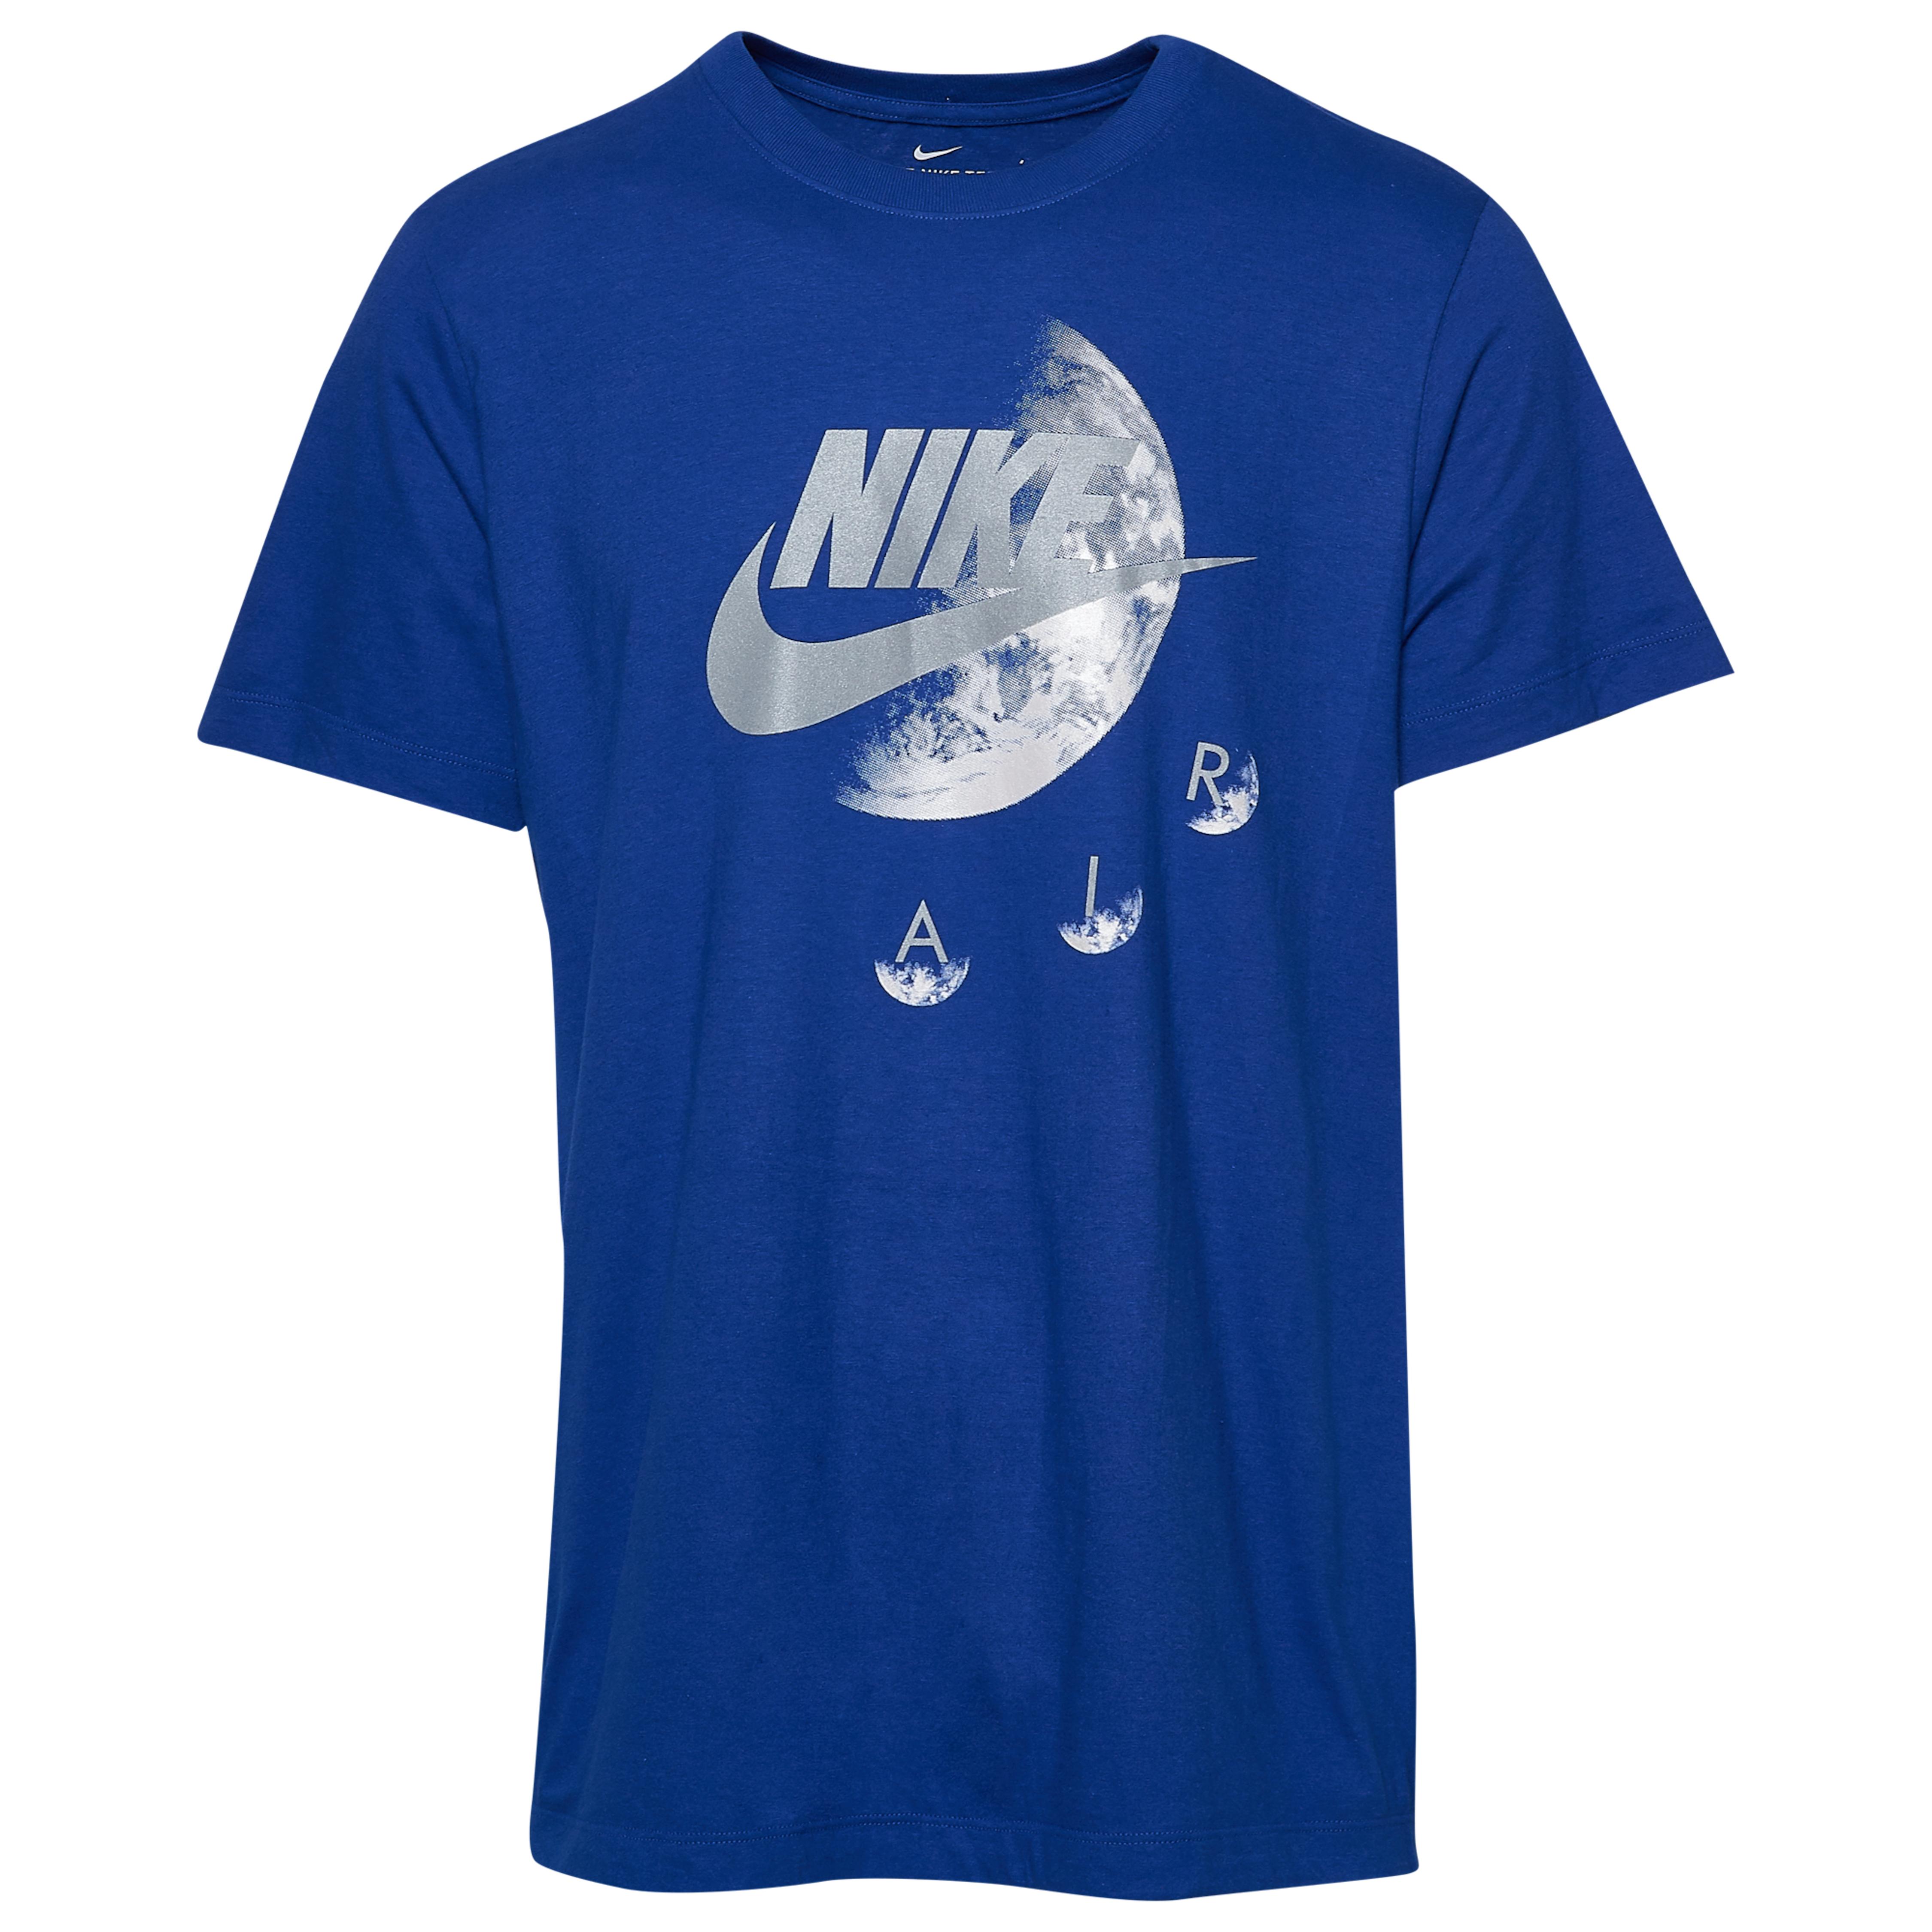 Nike Cotton Equinox T-shirt in Blue for 